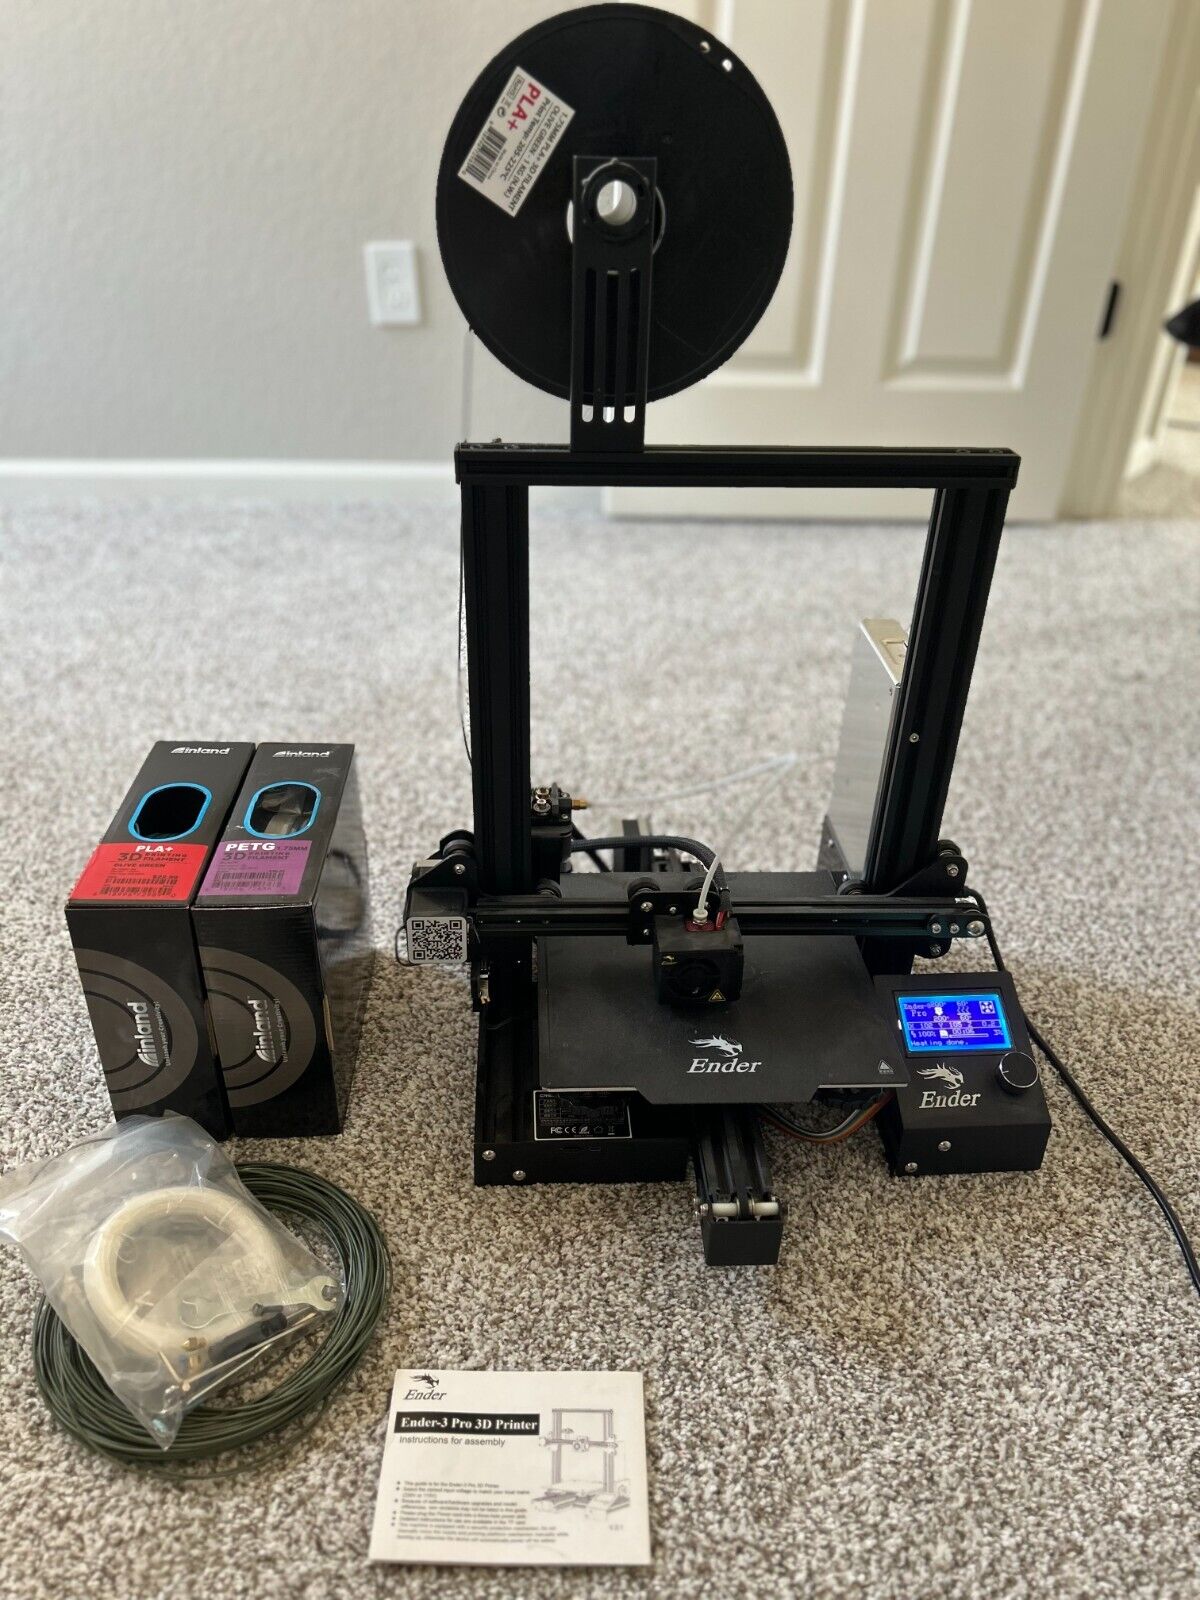 3D Printer, Ender-3 Pro, Minimal Use, Needs a new home, Comes w/ additional PLA